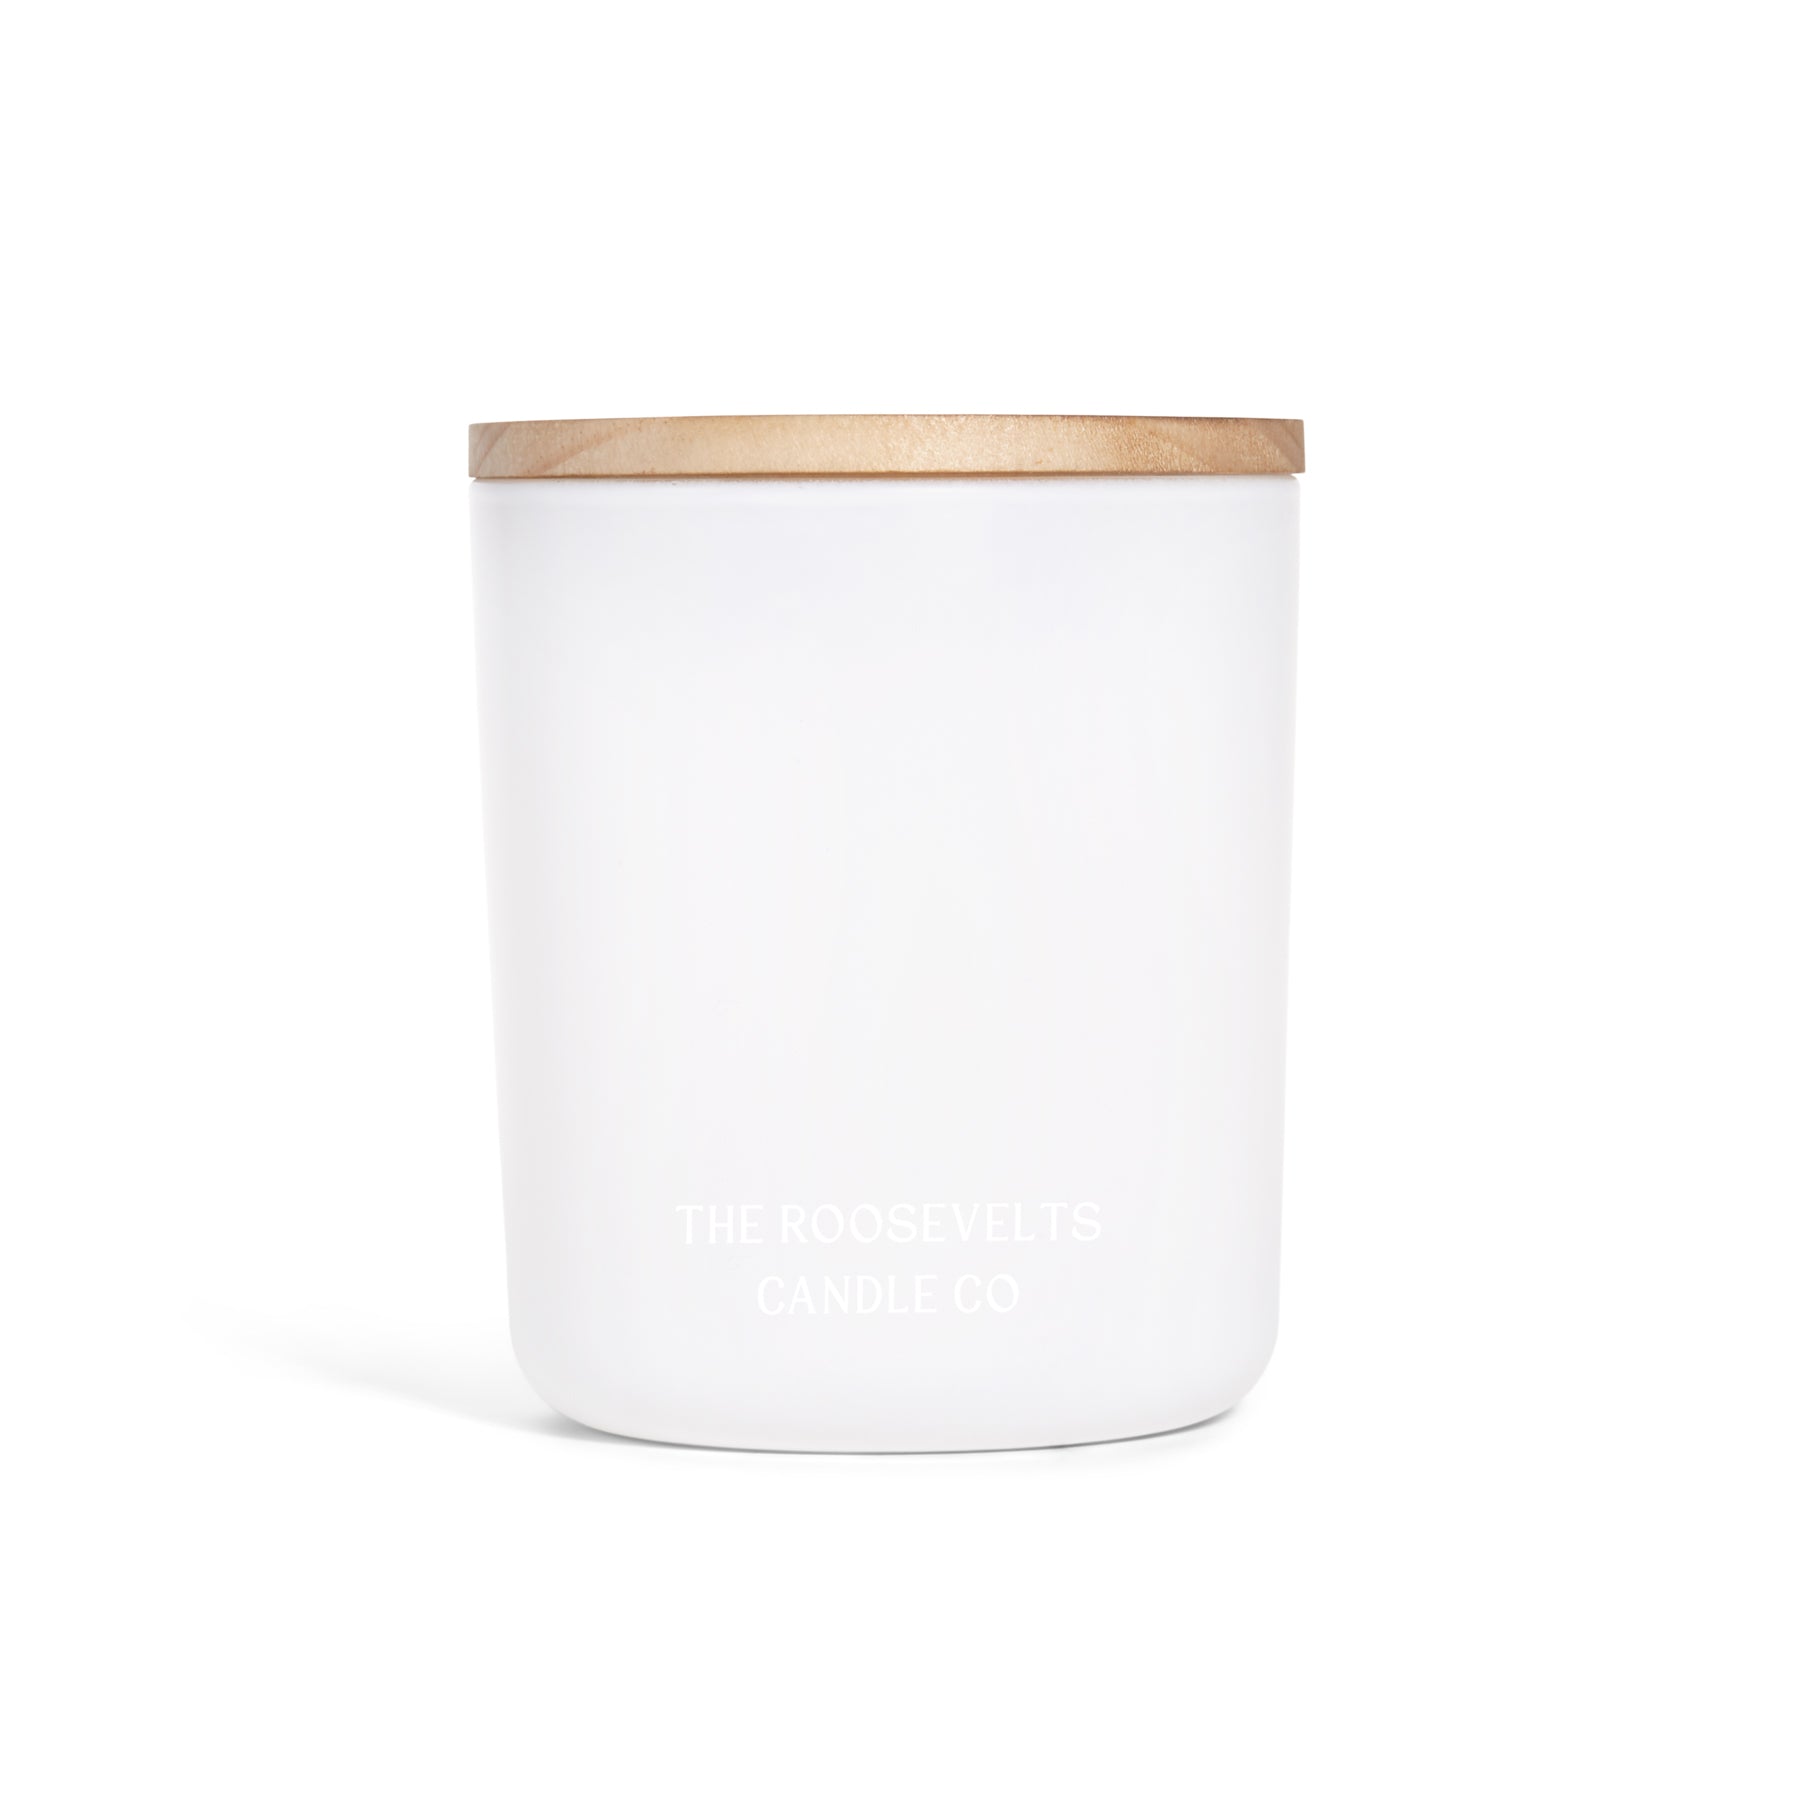 Smoky Mtn Candle - The Roosevelts Candle Co.